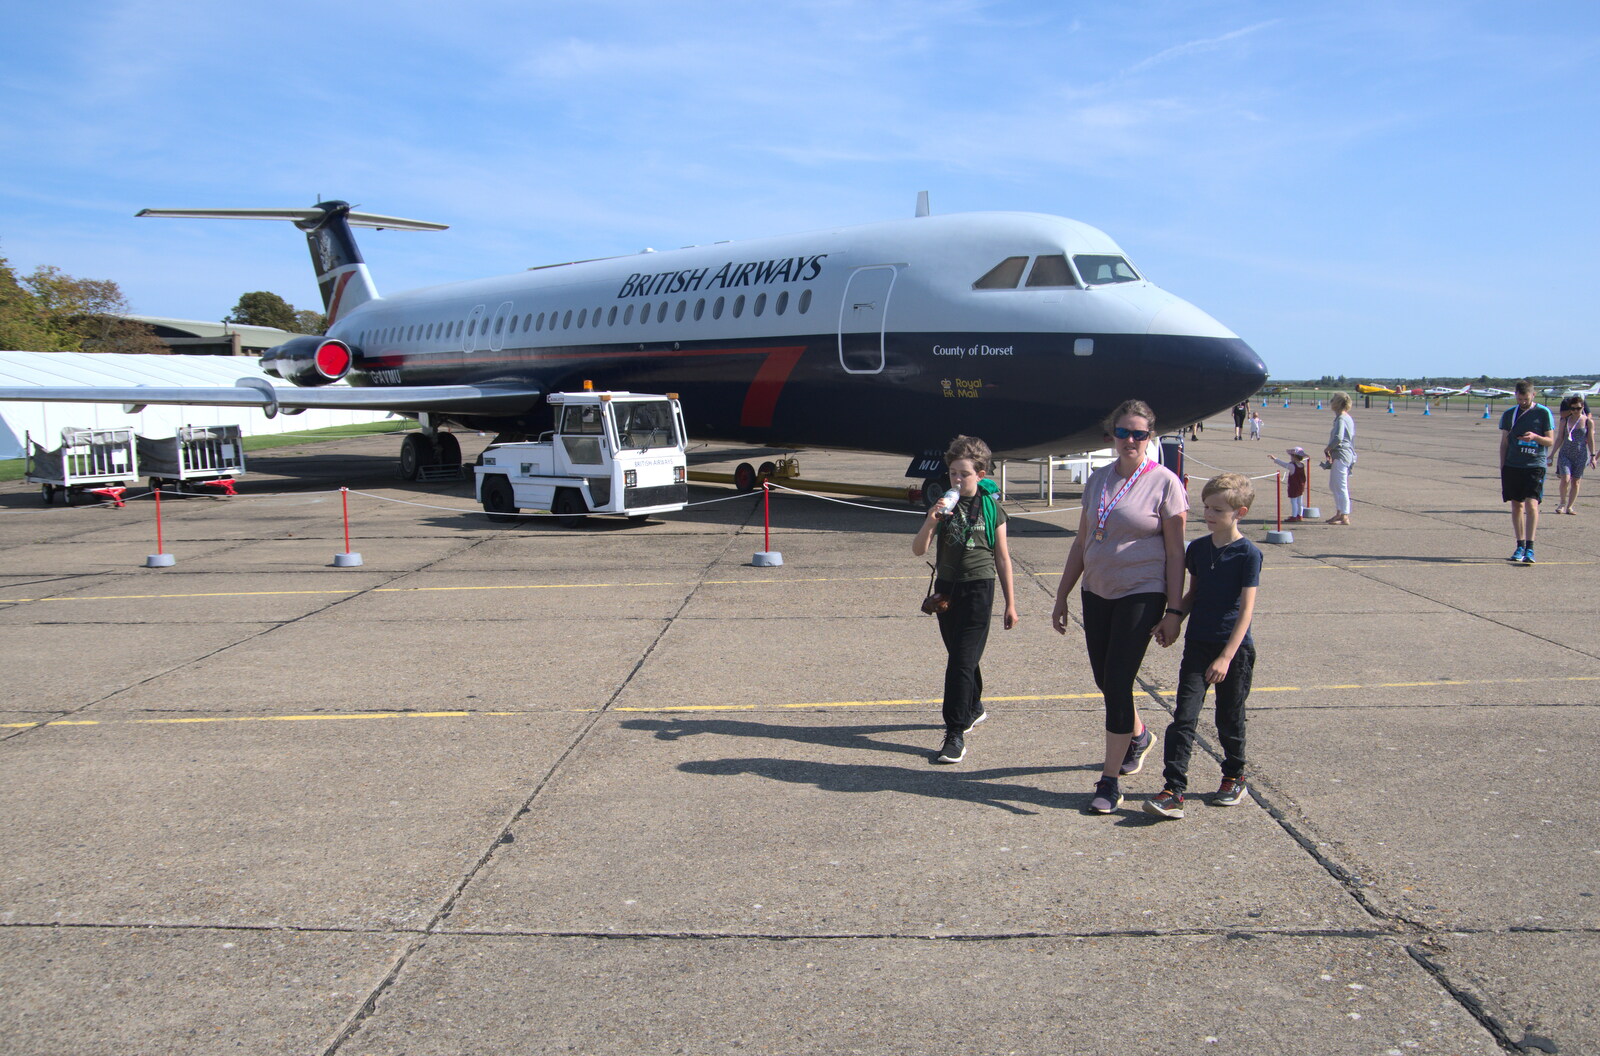 The gang roam around in front of a BAC 1-11 from The Duxford Dash, IWM Duxford, Cambridge - 13th September 2020